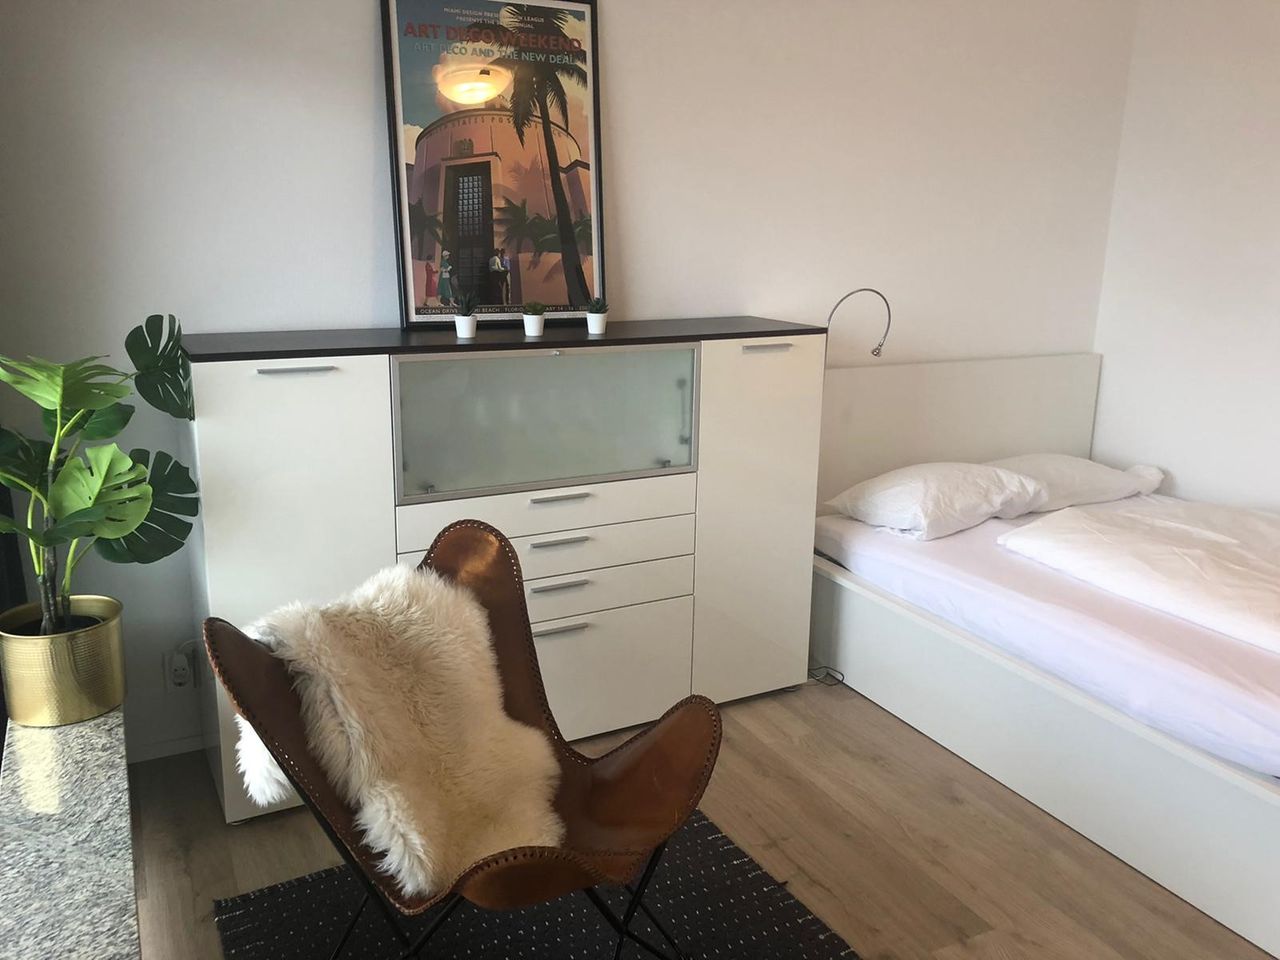 Renovated, bright, central apartment with view over all of Cologne, balcony and underground parking